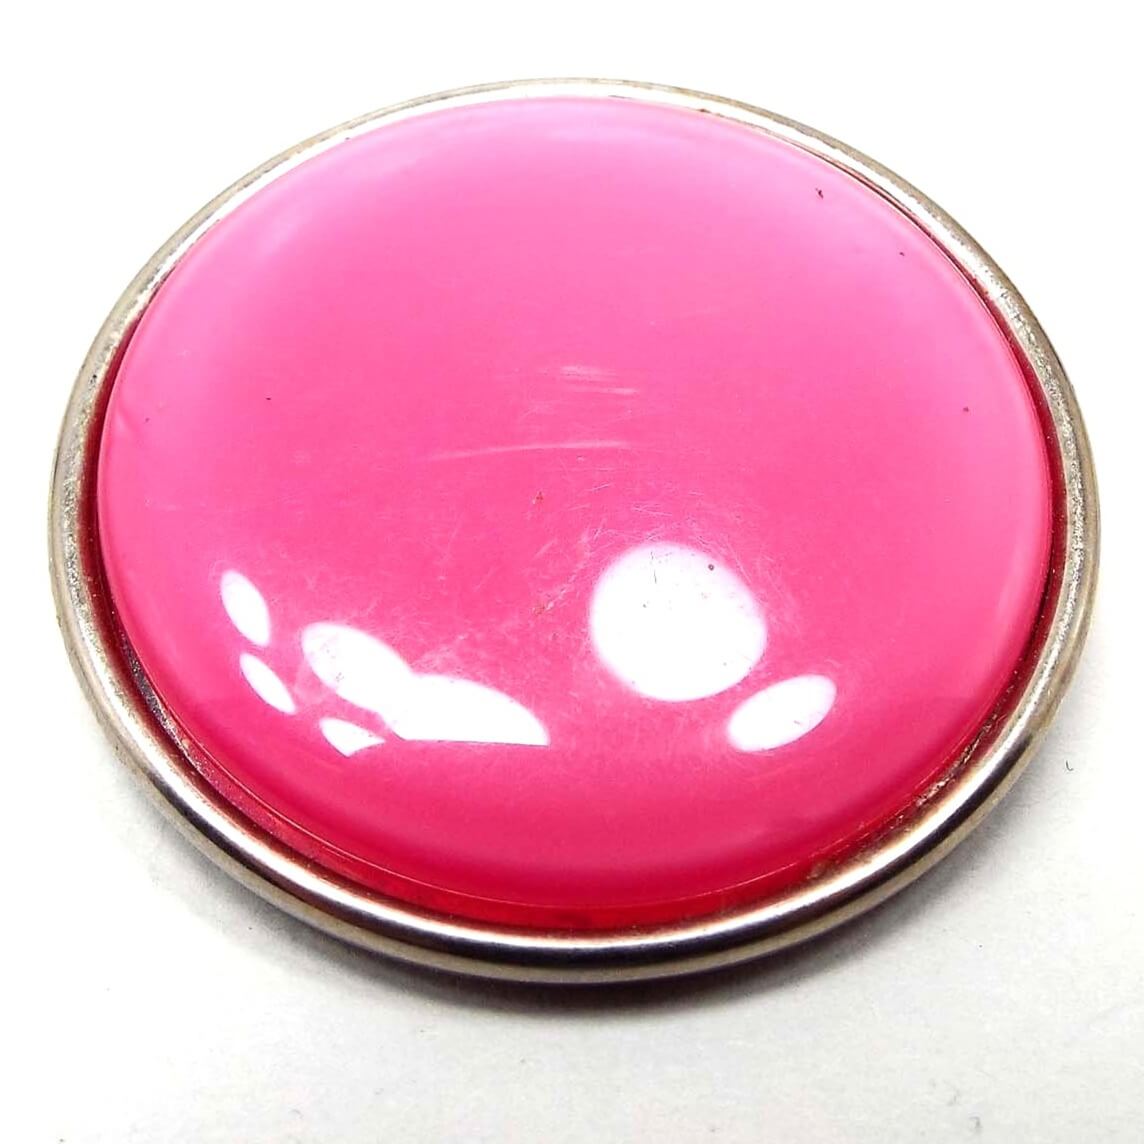 Front view of the Mid Century vintage moonglow lucite scarf clip. It is round and pink in color. The setting is silver tone color metal. Some scuff scratching from age can be seen on the plastic cab. Whites spots showing are reflections from lights during photography.